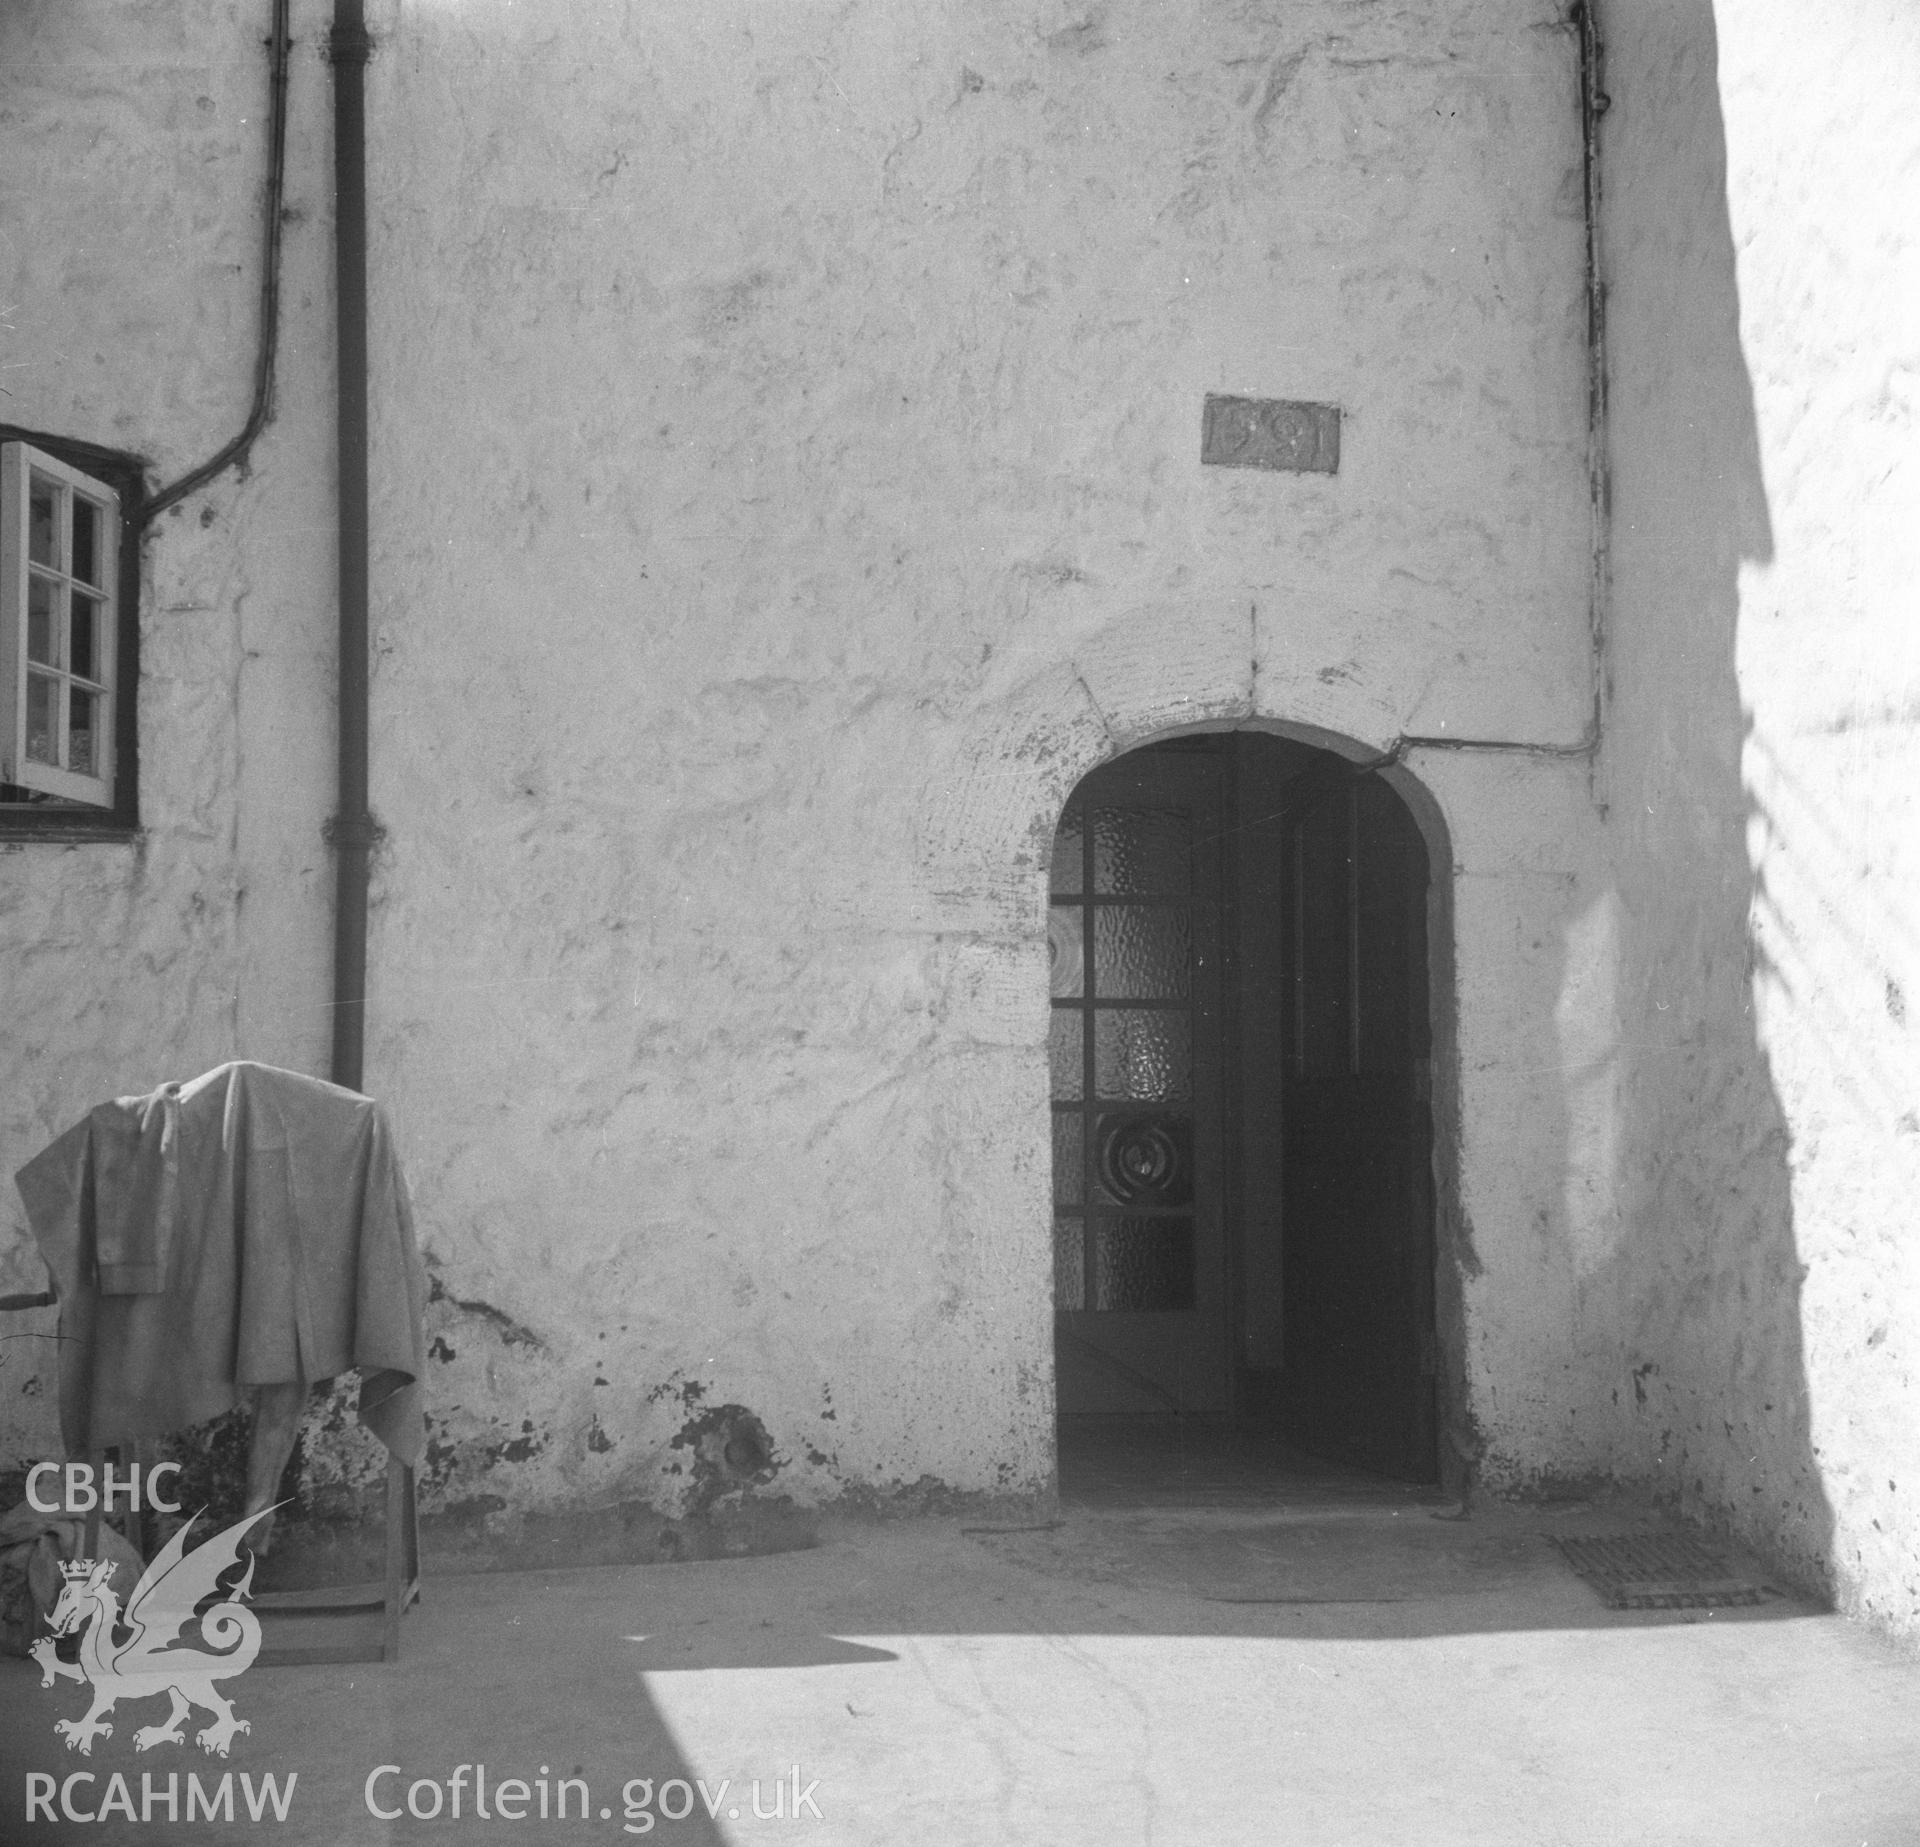 Black and white acetate negative showing exterior detail of doorway with datestone at Hendre-Uchaf, Abergele.